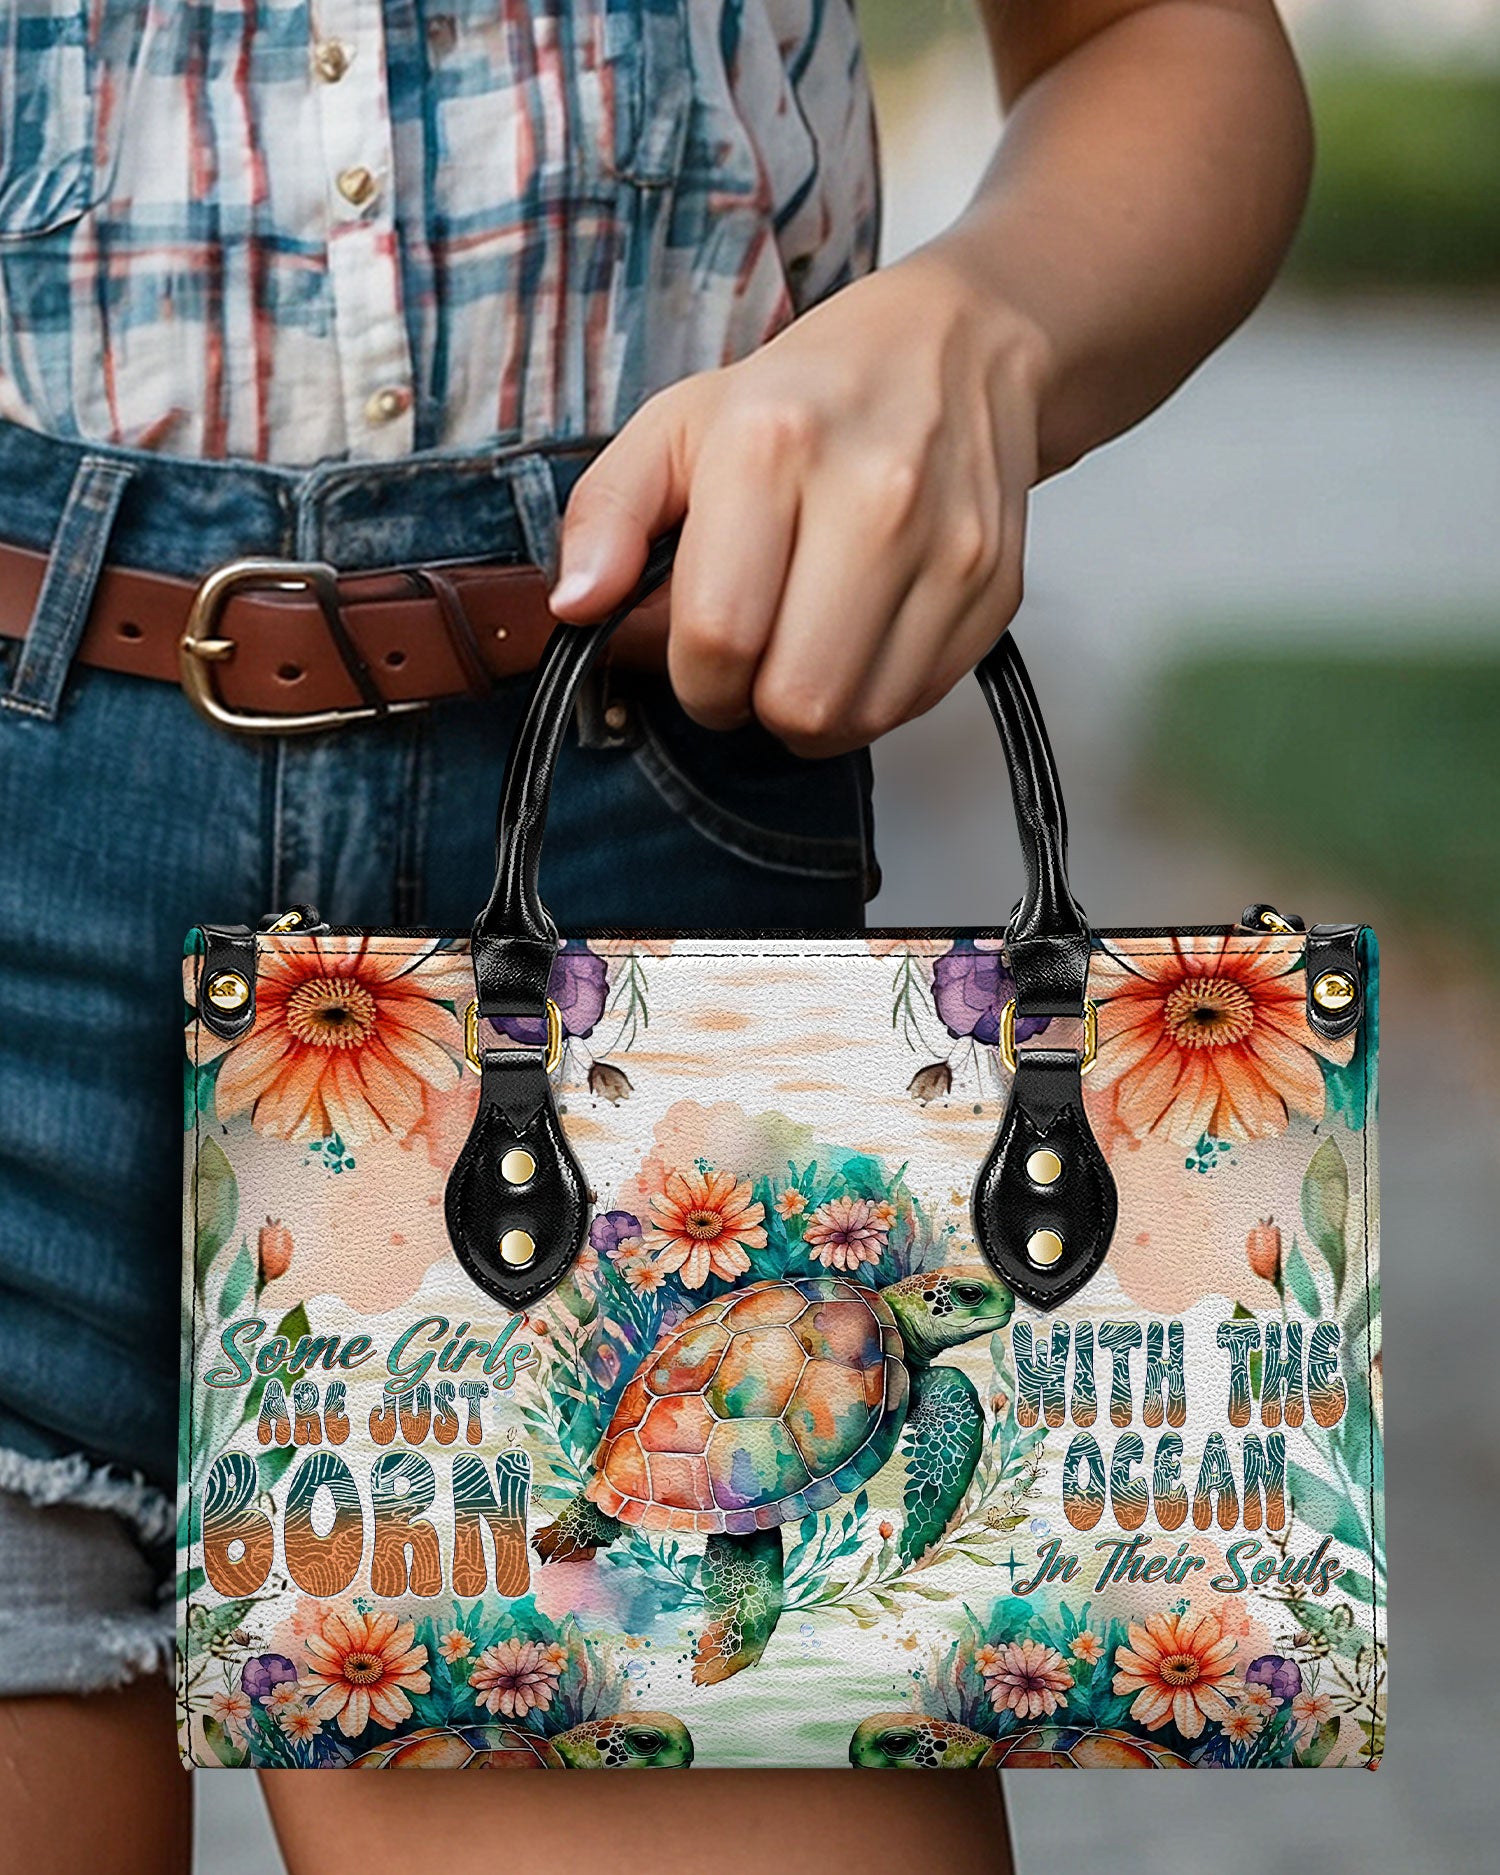 SOME GIRLS ARE JUST BORN TURLTE WATERCOLOR LEATHER HANDBAG - TLNT1104247